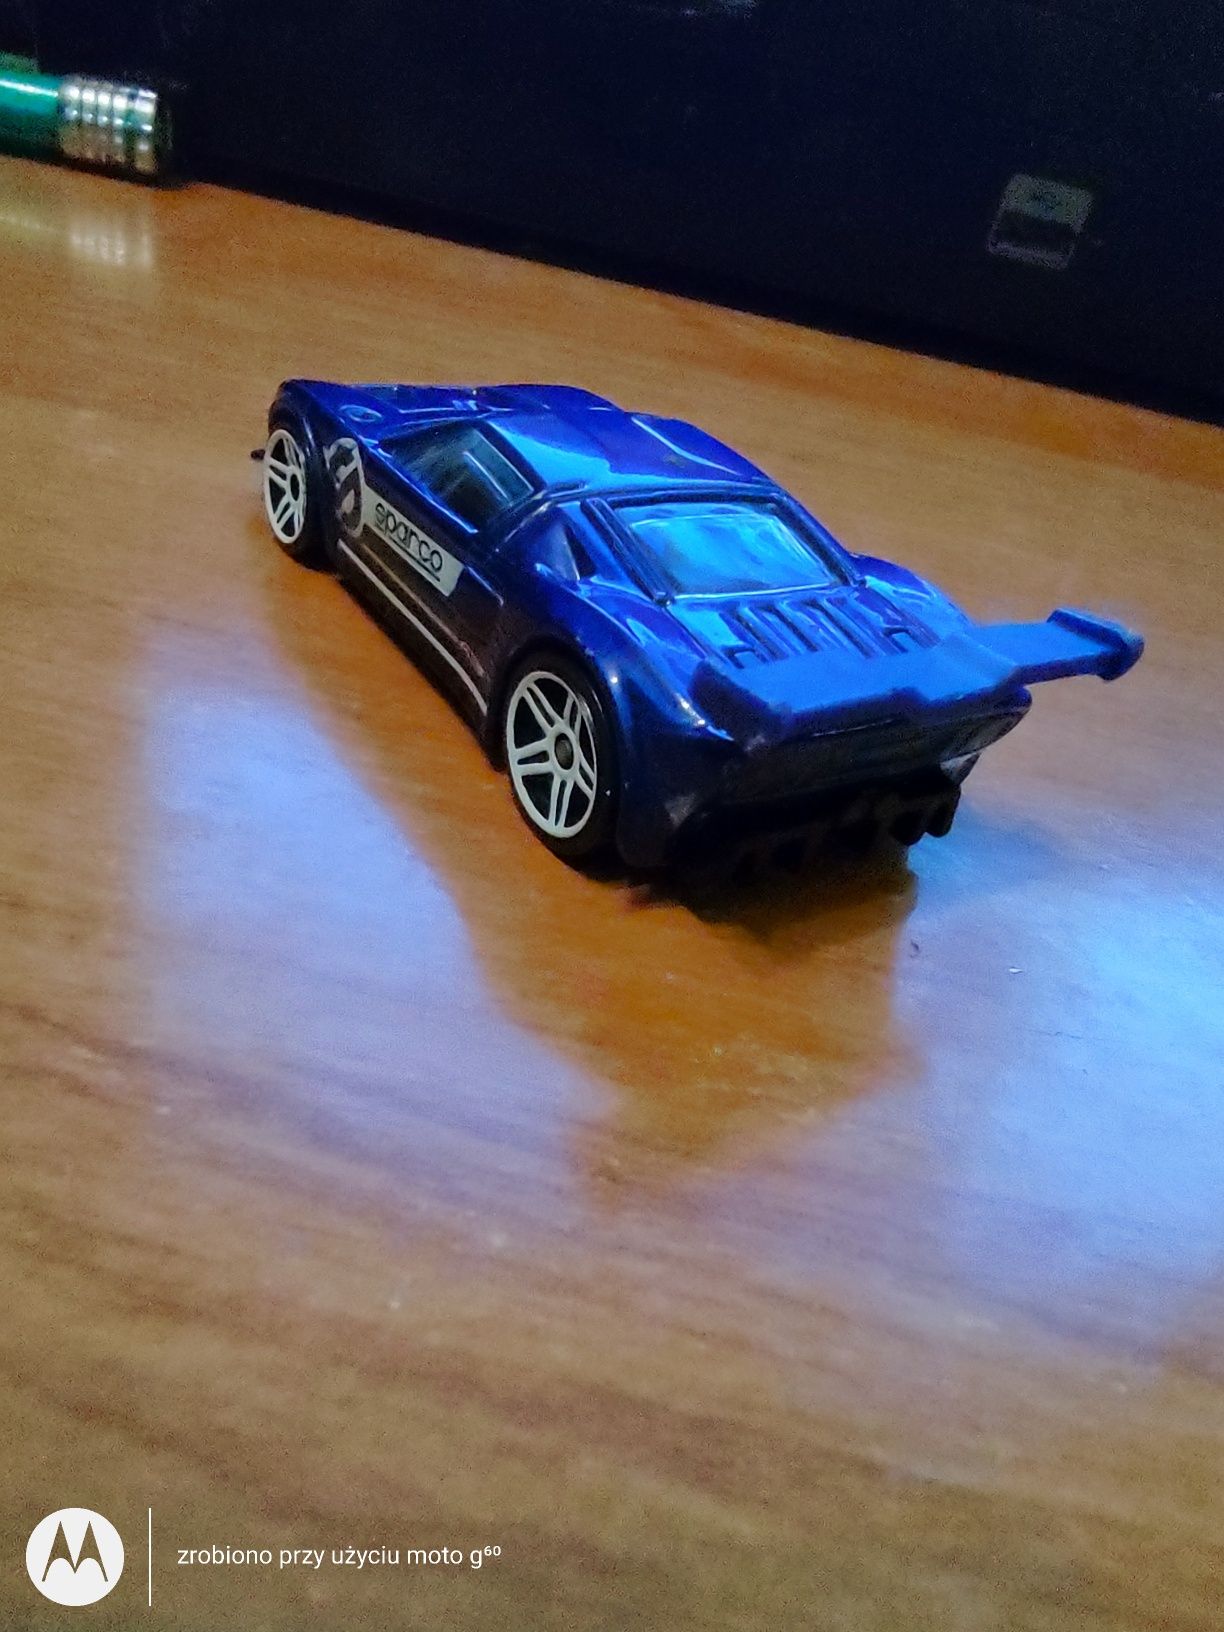 Hot wheels Ford GT Sparco